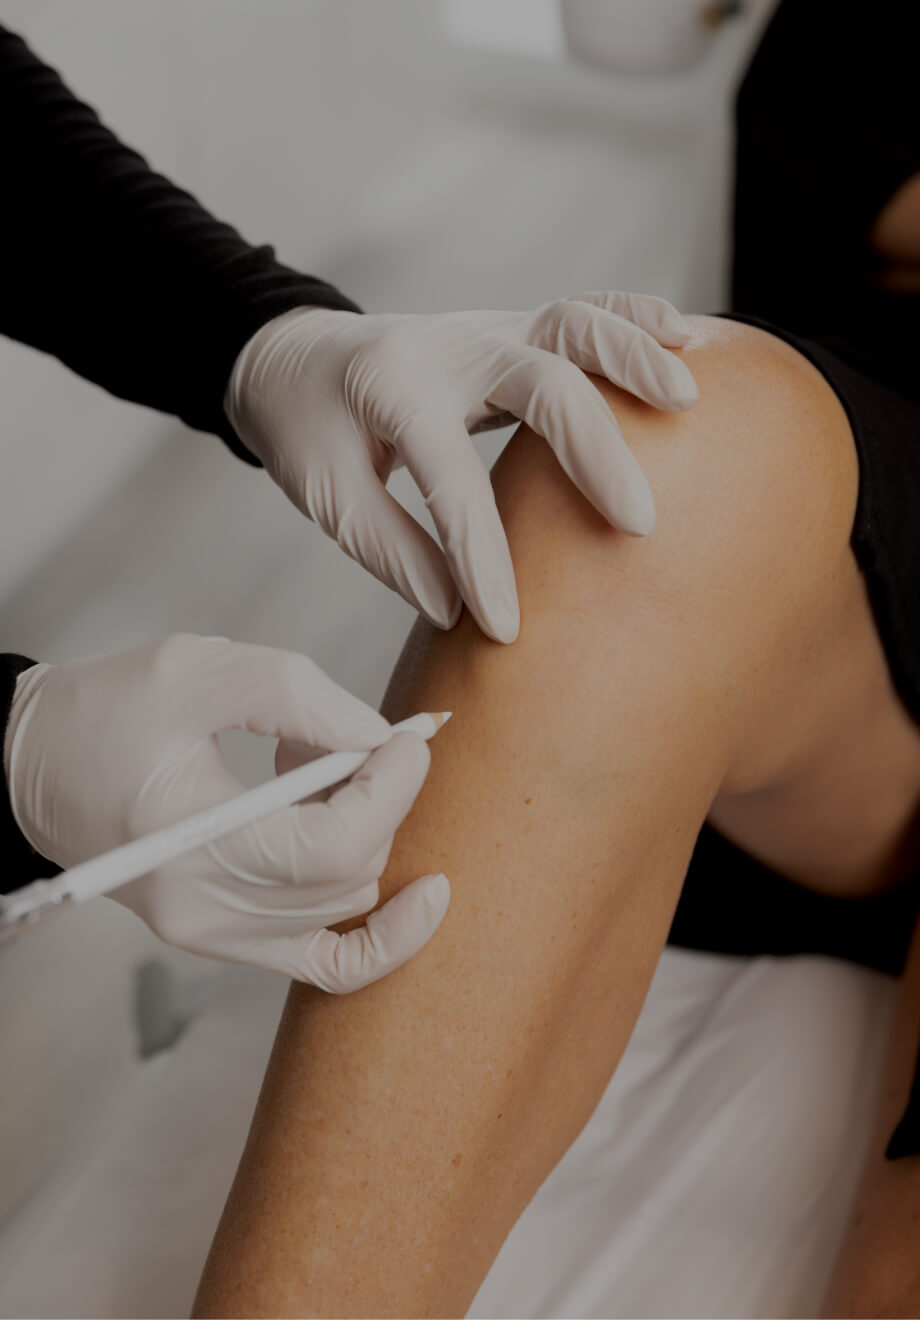 A medico-aesthetic technician from the Chloé Clinic delimiting the areas for laser hair removal on a woman's legs